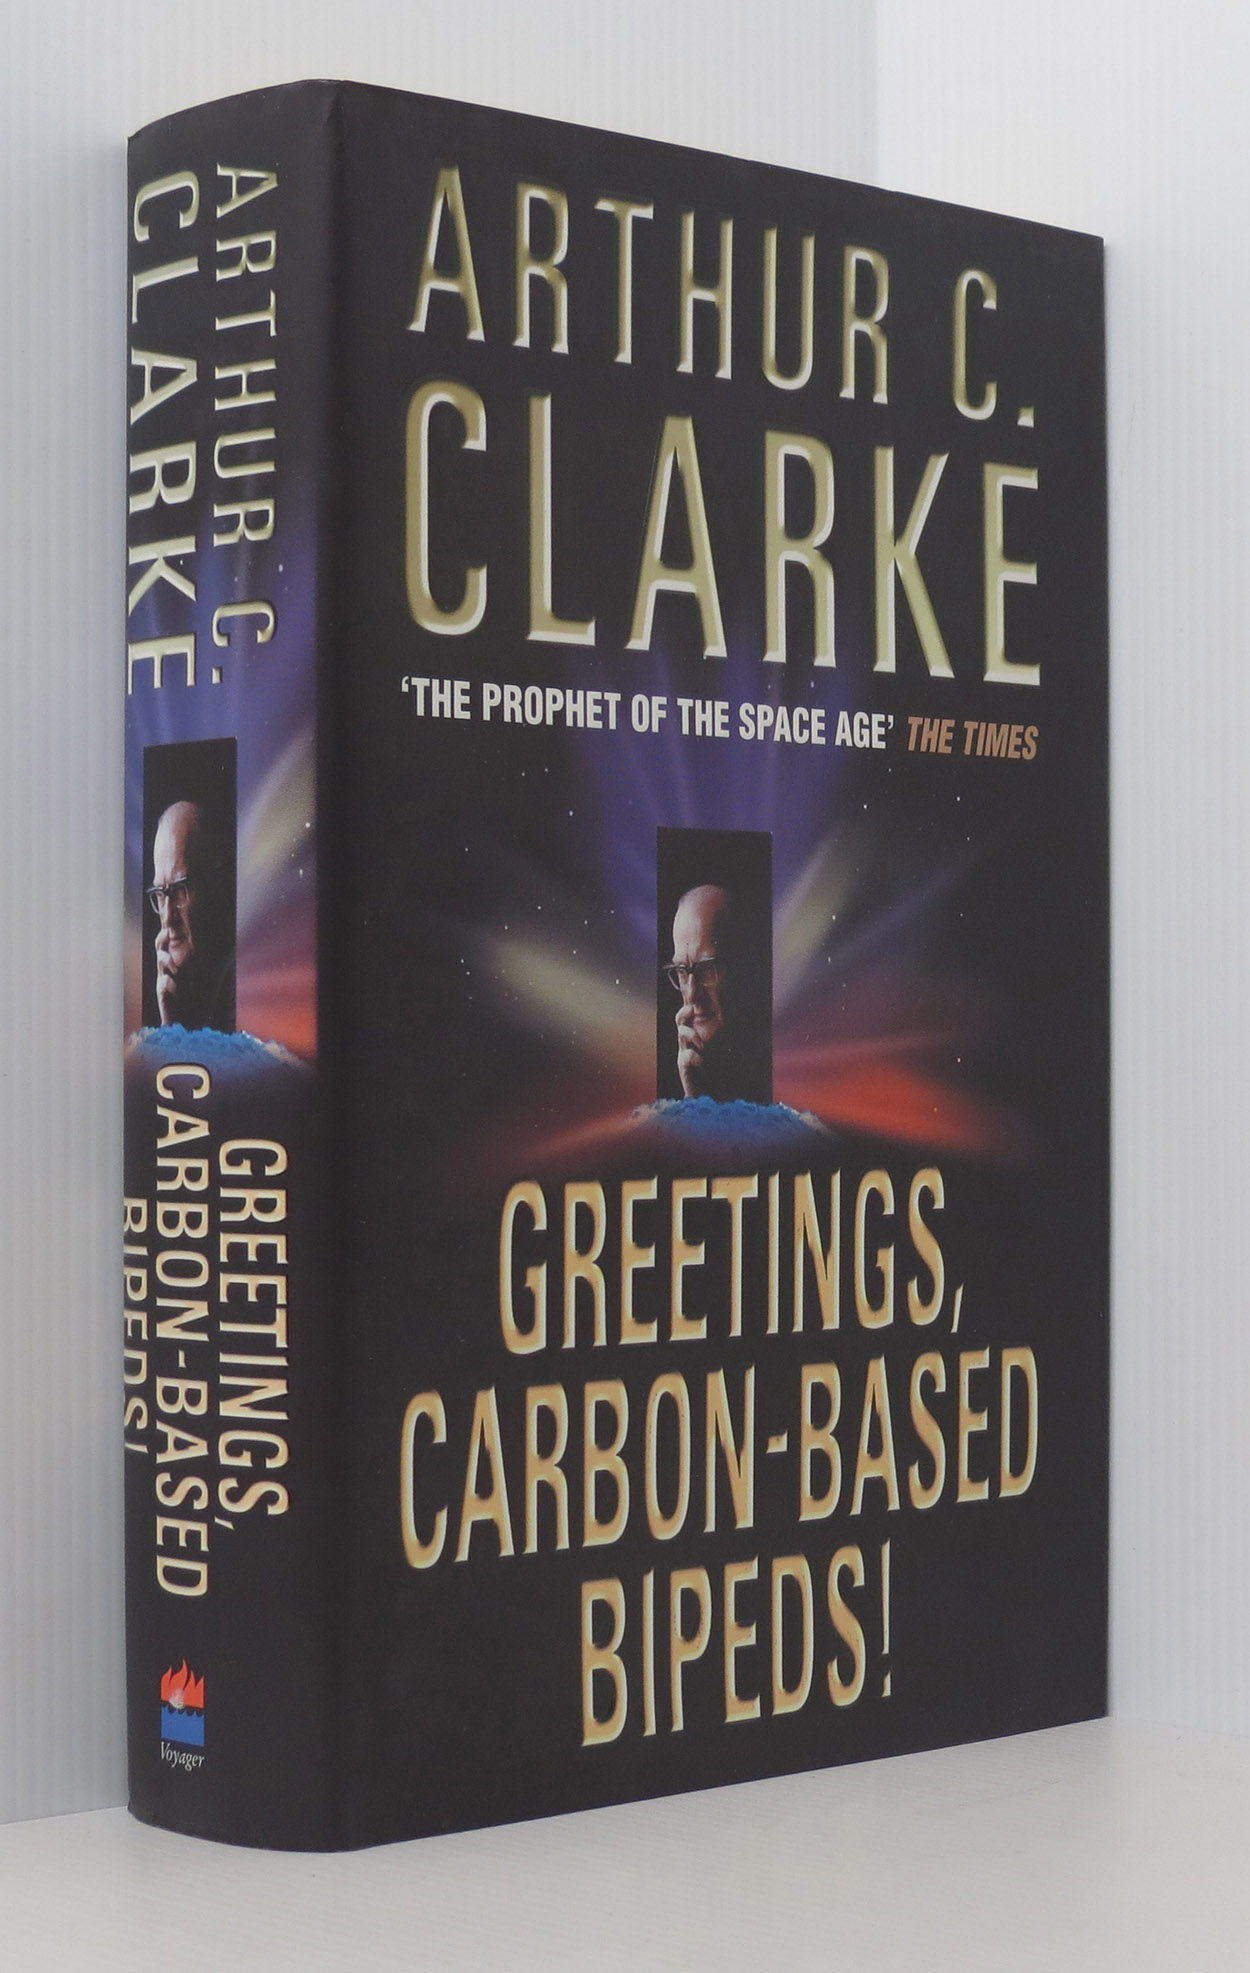 Image for Greetings, Carbon-Based Bipeds!